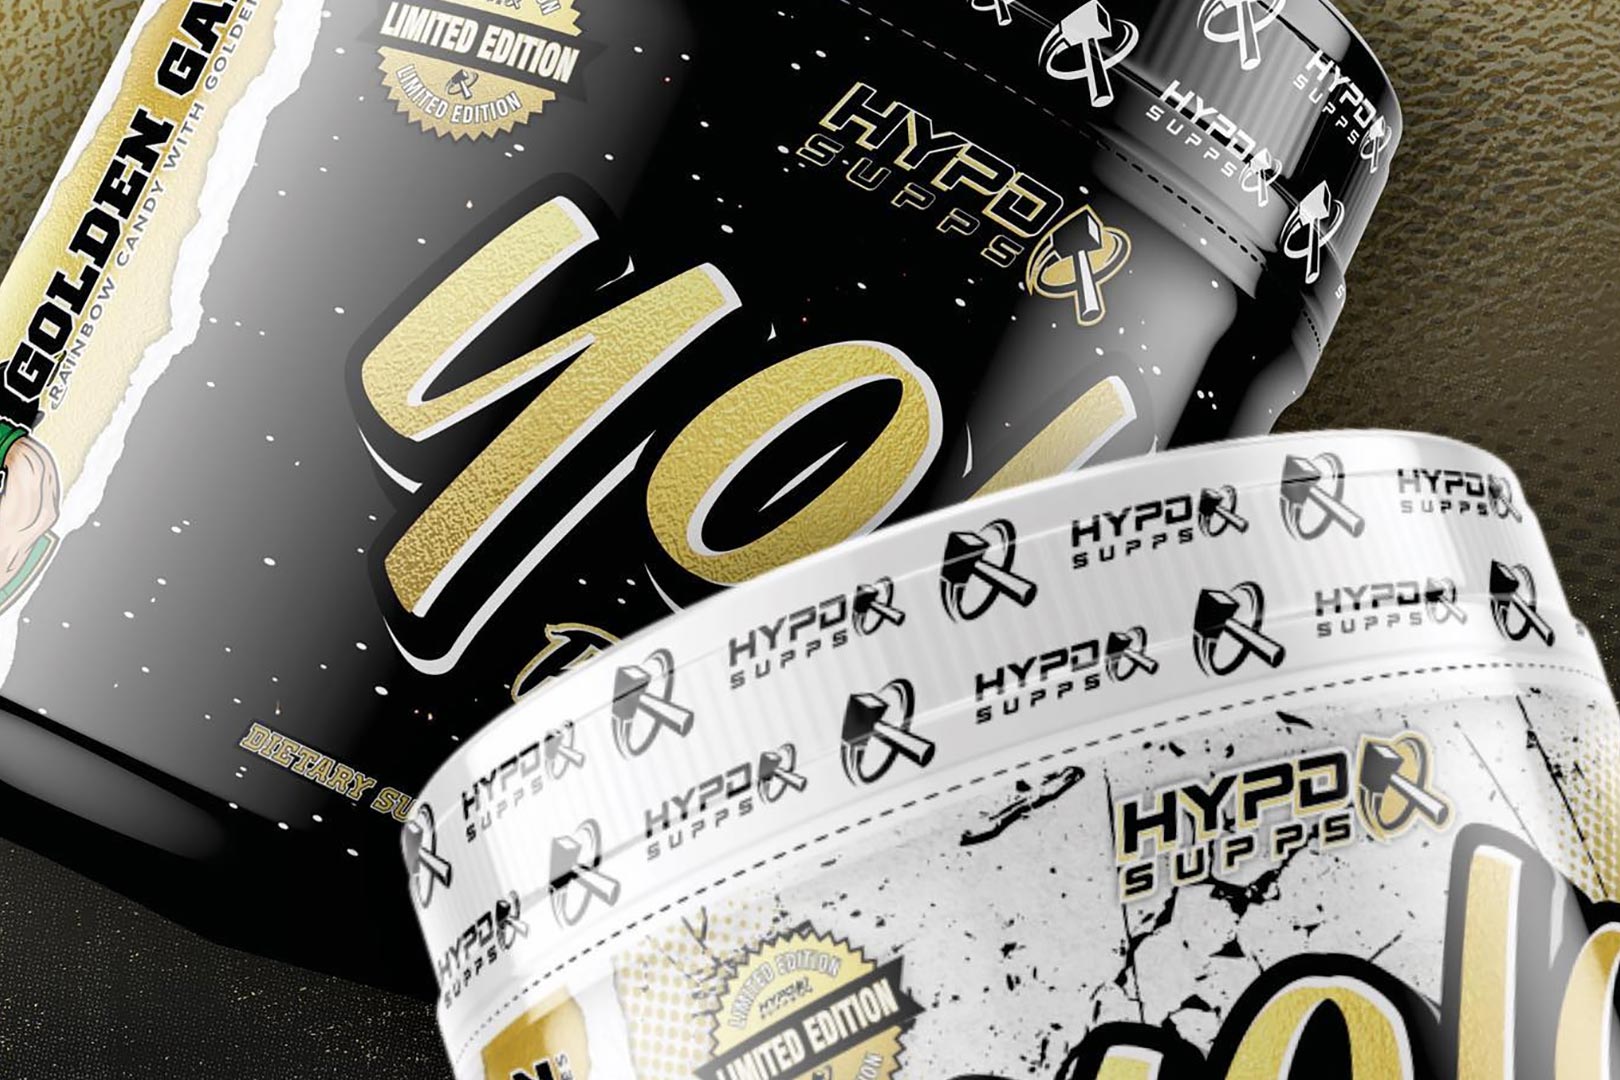 Hypd Supps Limited Golden Gainz Yolo